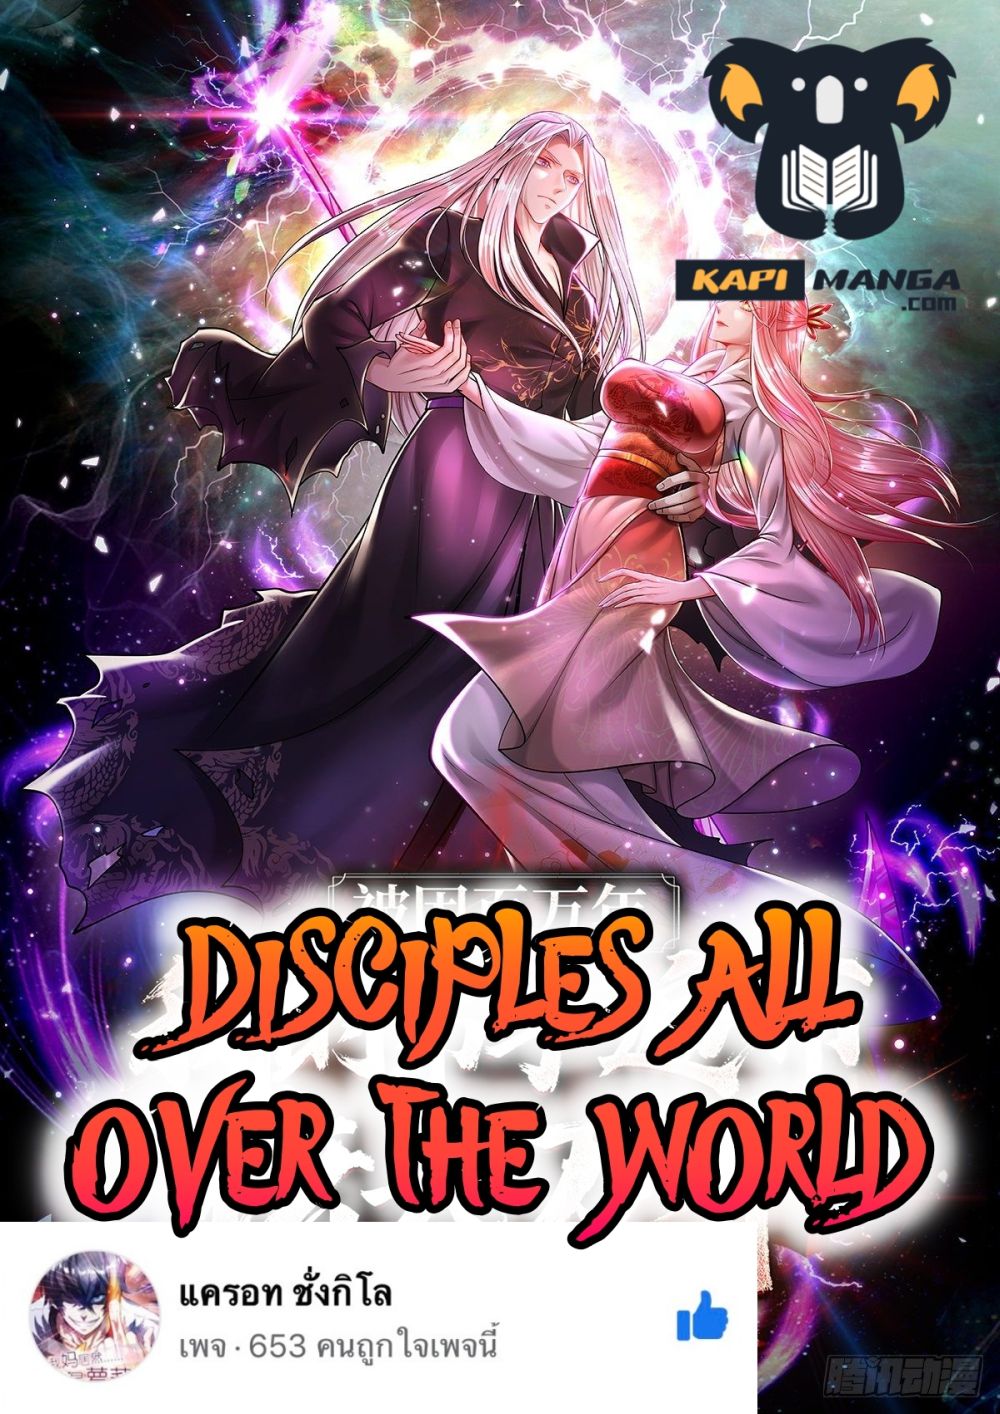 Disciples All Over the World à¸à¸­à¸à¸à¸µà¹ 46 (1)